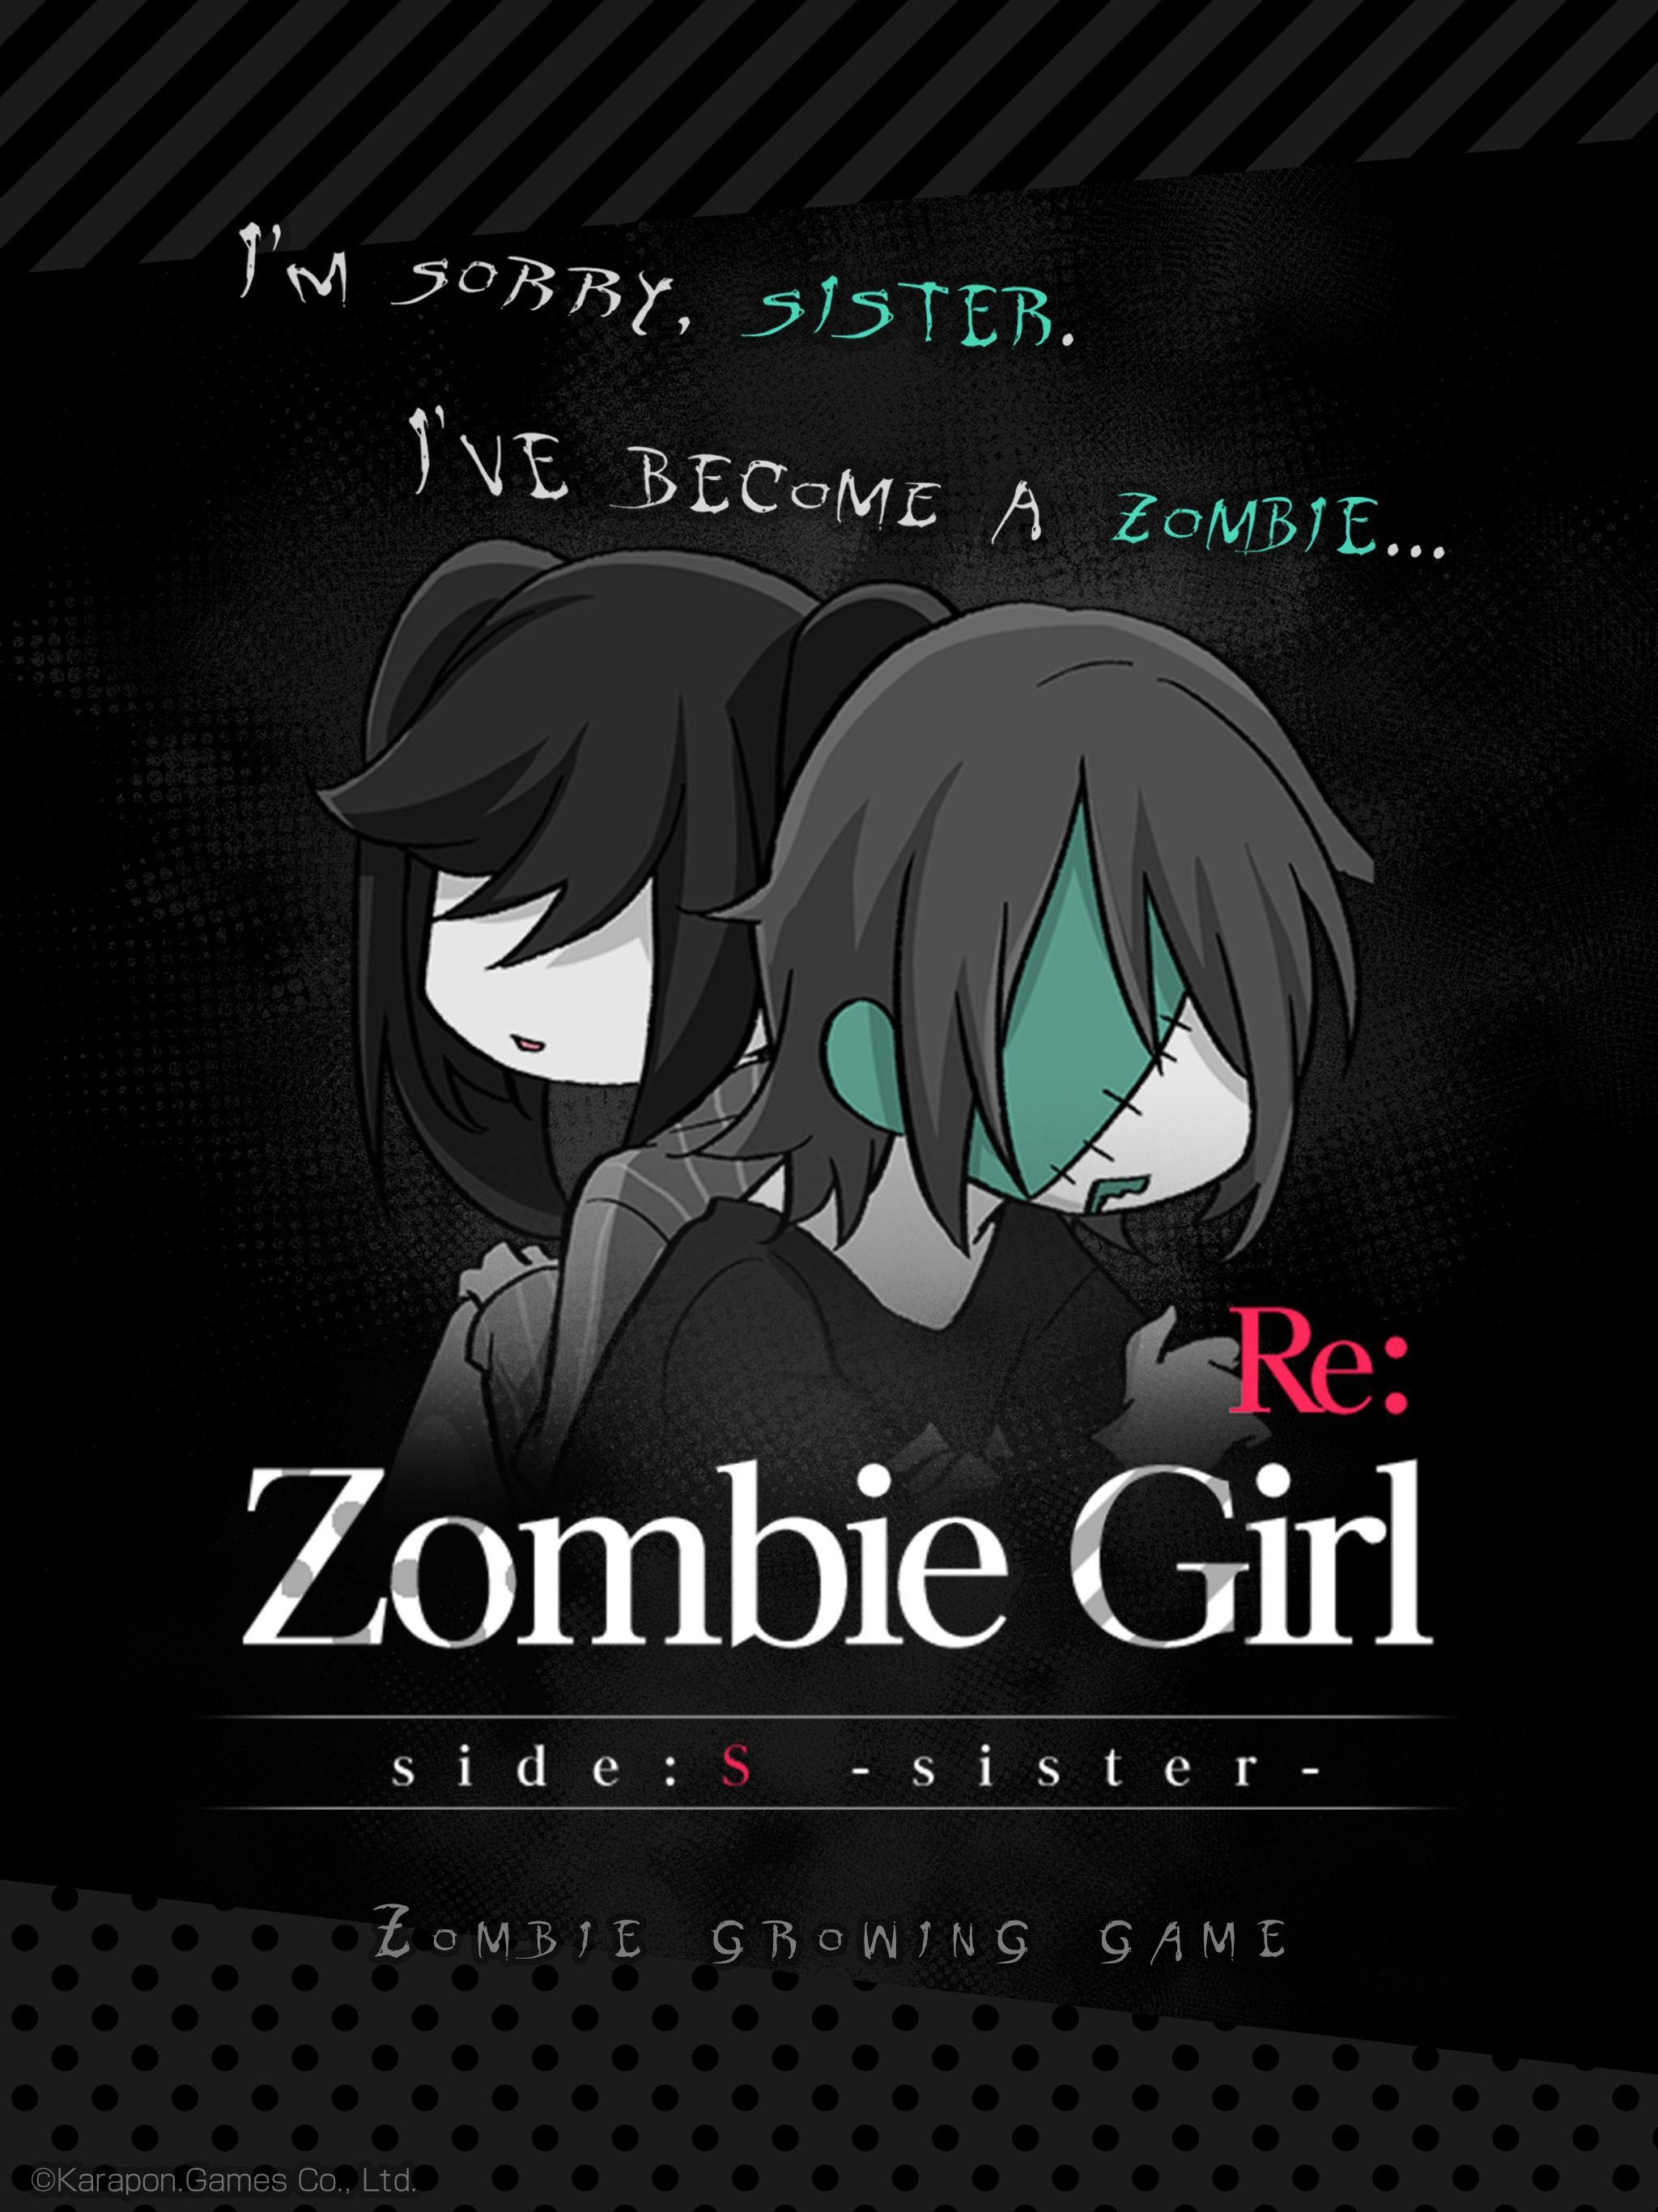 Sisters android. Sister Android. ZOMBIEGIRL-Zombie growing game.